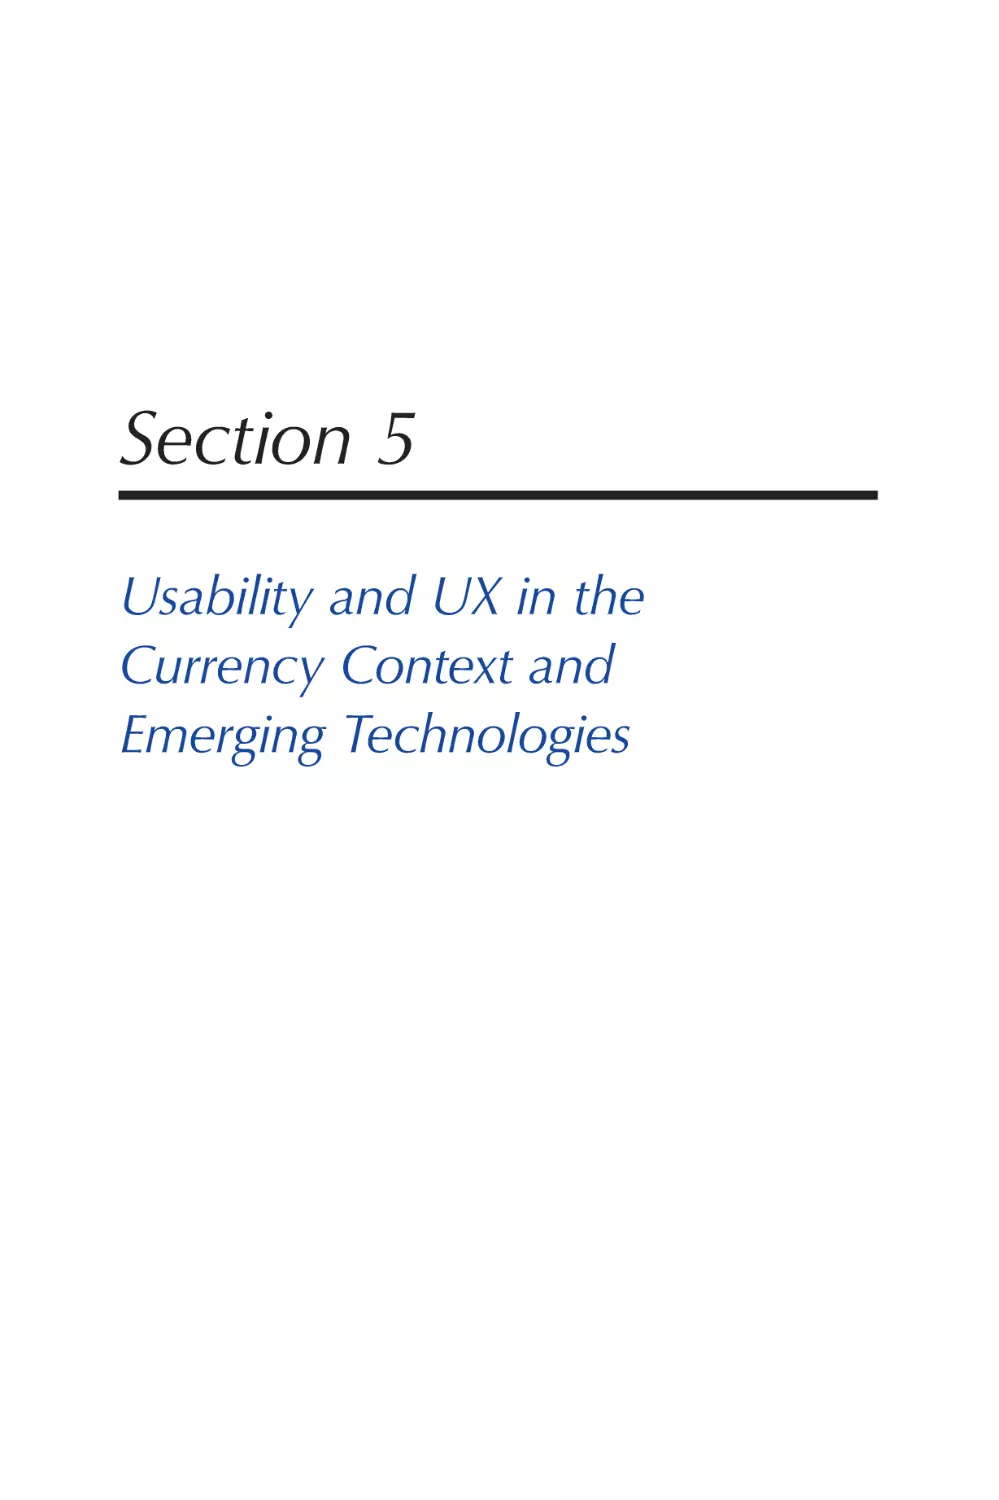 Section 5 Usability and UX in the Currency Context and Emerging Technologies